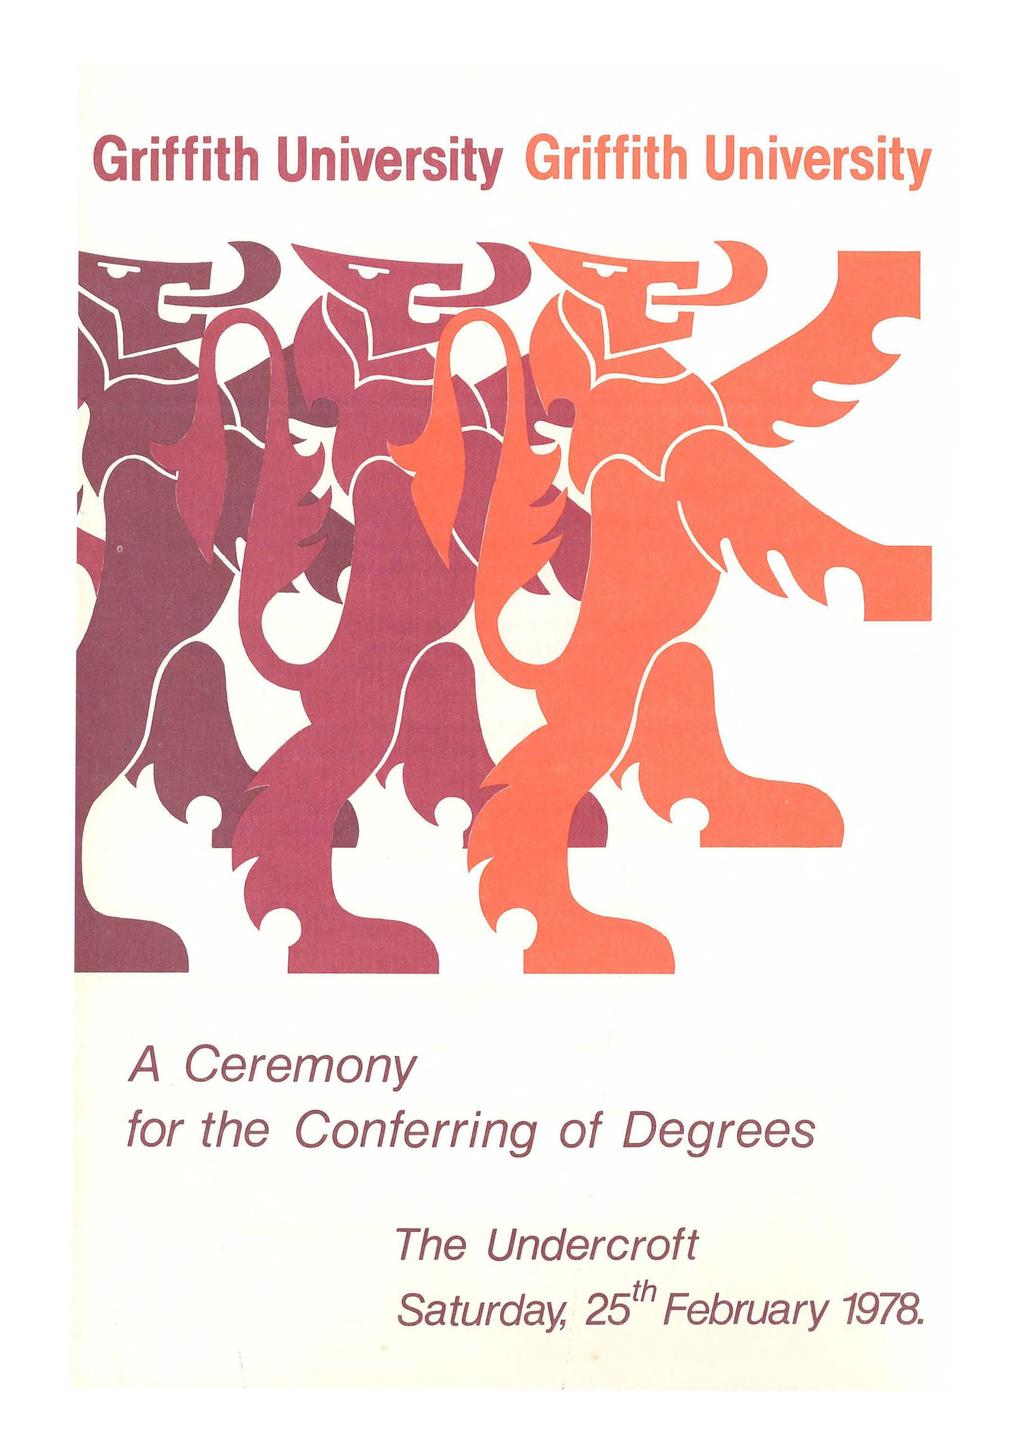 Griffith University Griffith University A Ceremony for the